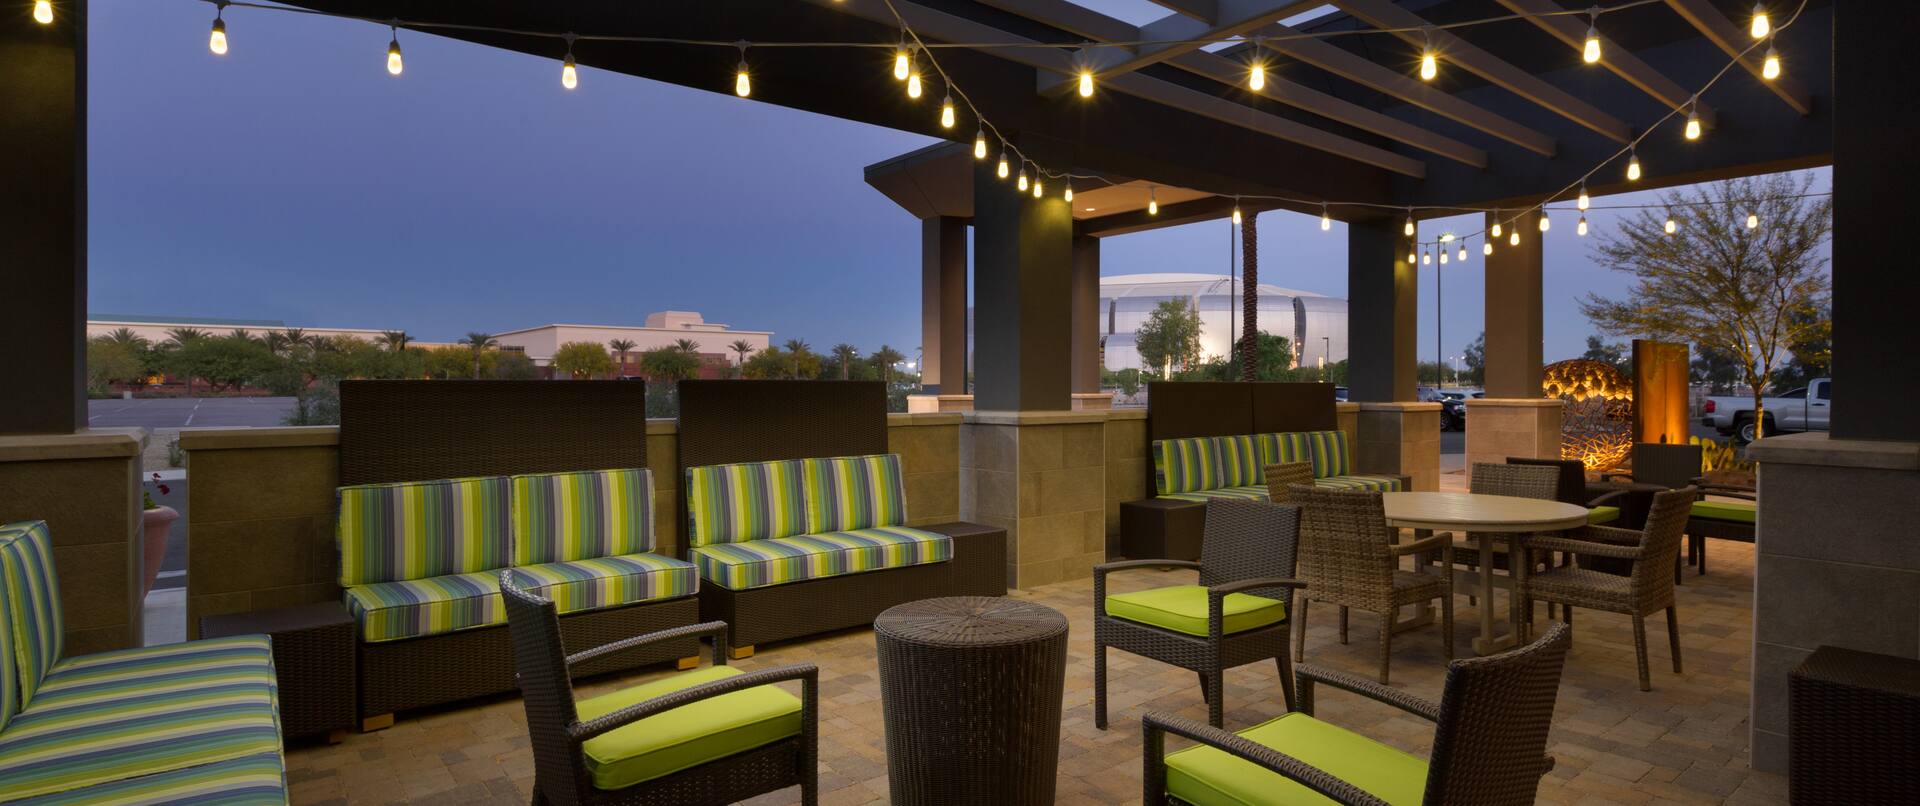 Round Table, Armchairs With Green Cushions and Striped Sofas Under Pavilion With Illuminated String Lights on Outdoor Patio at Dusk